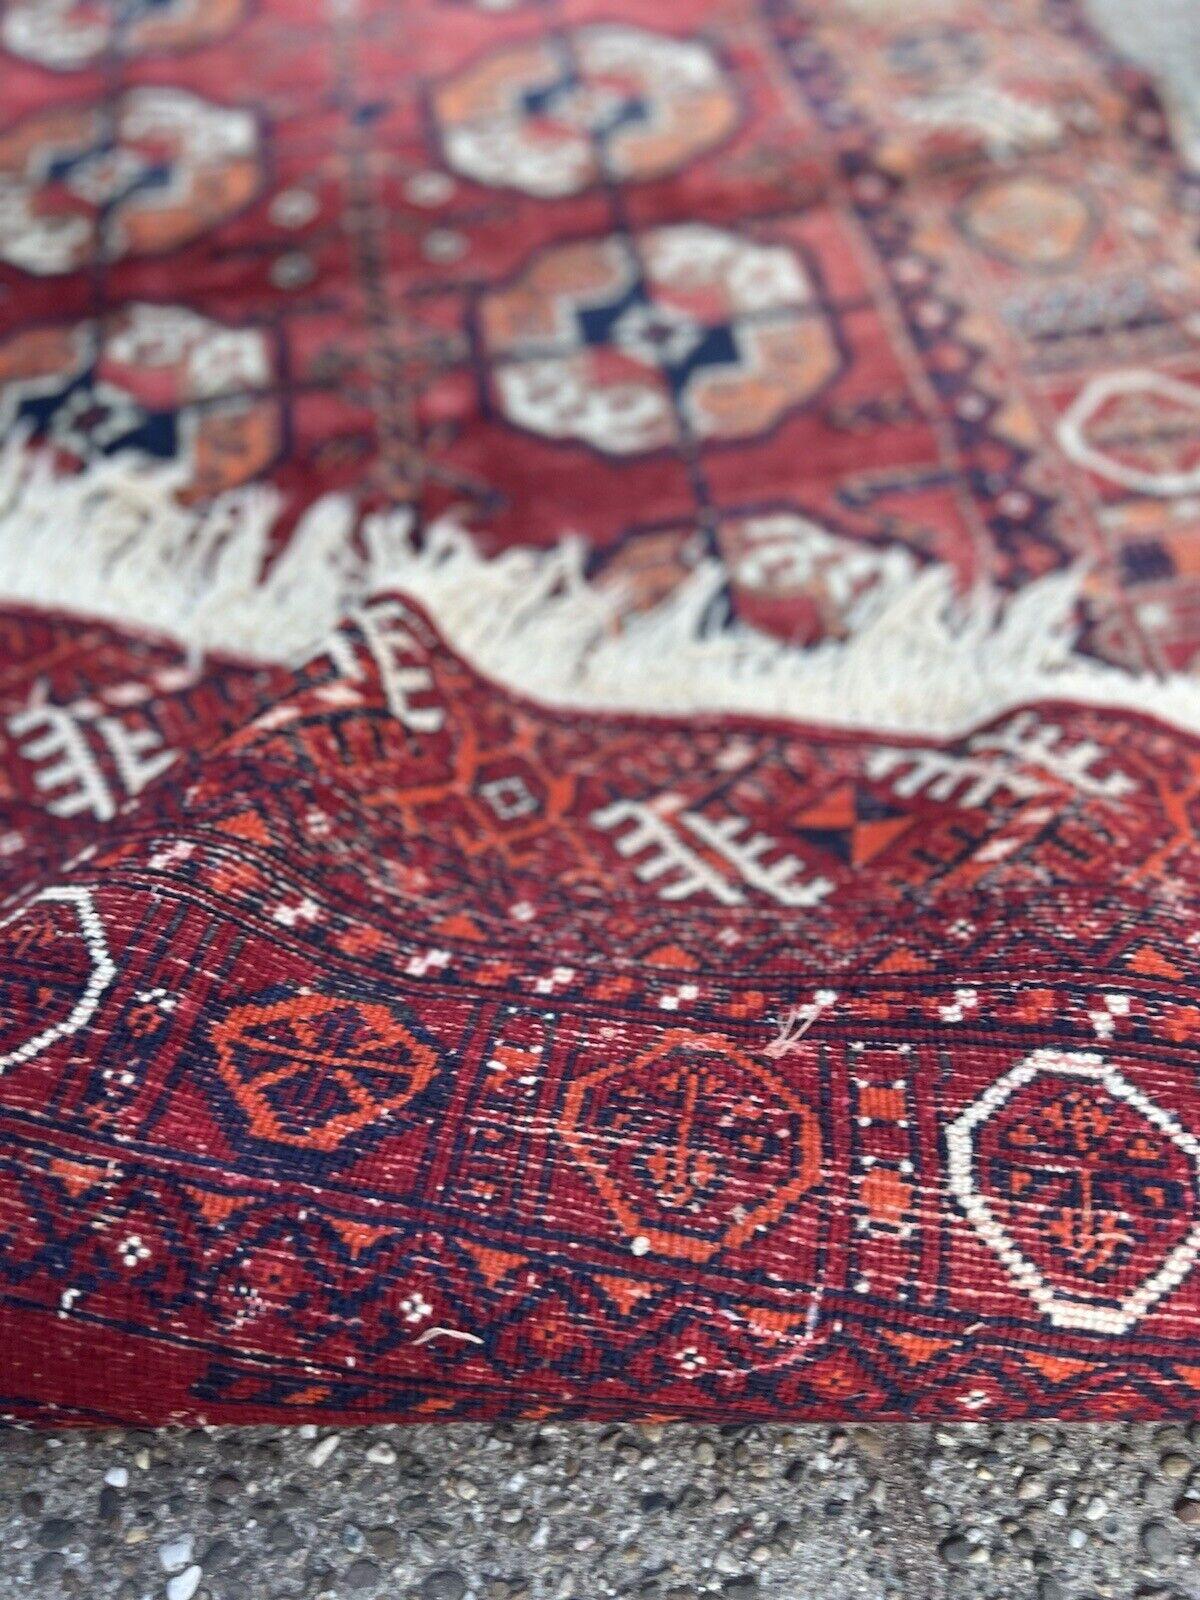 Step back in time with this exquisite Handmade Vintage Afghan Ersari Rug, a timeless piece of artistry from the 1970s. Measuring 3.2’ x 4.6’ (98cm x 142cm), this rug is the perfect size to add warmth and character to any room.

Crafted with care by